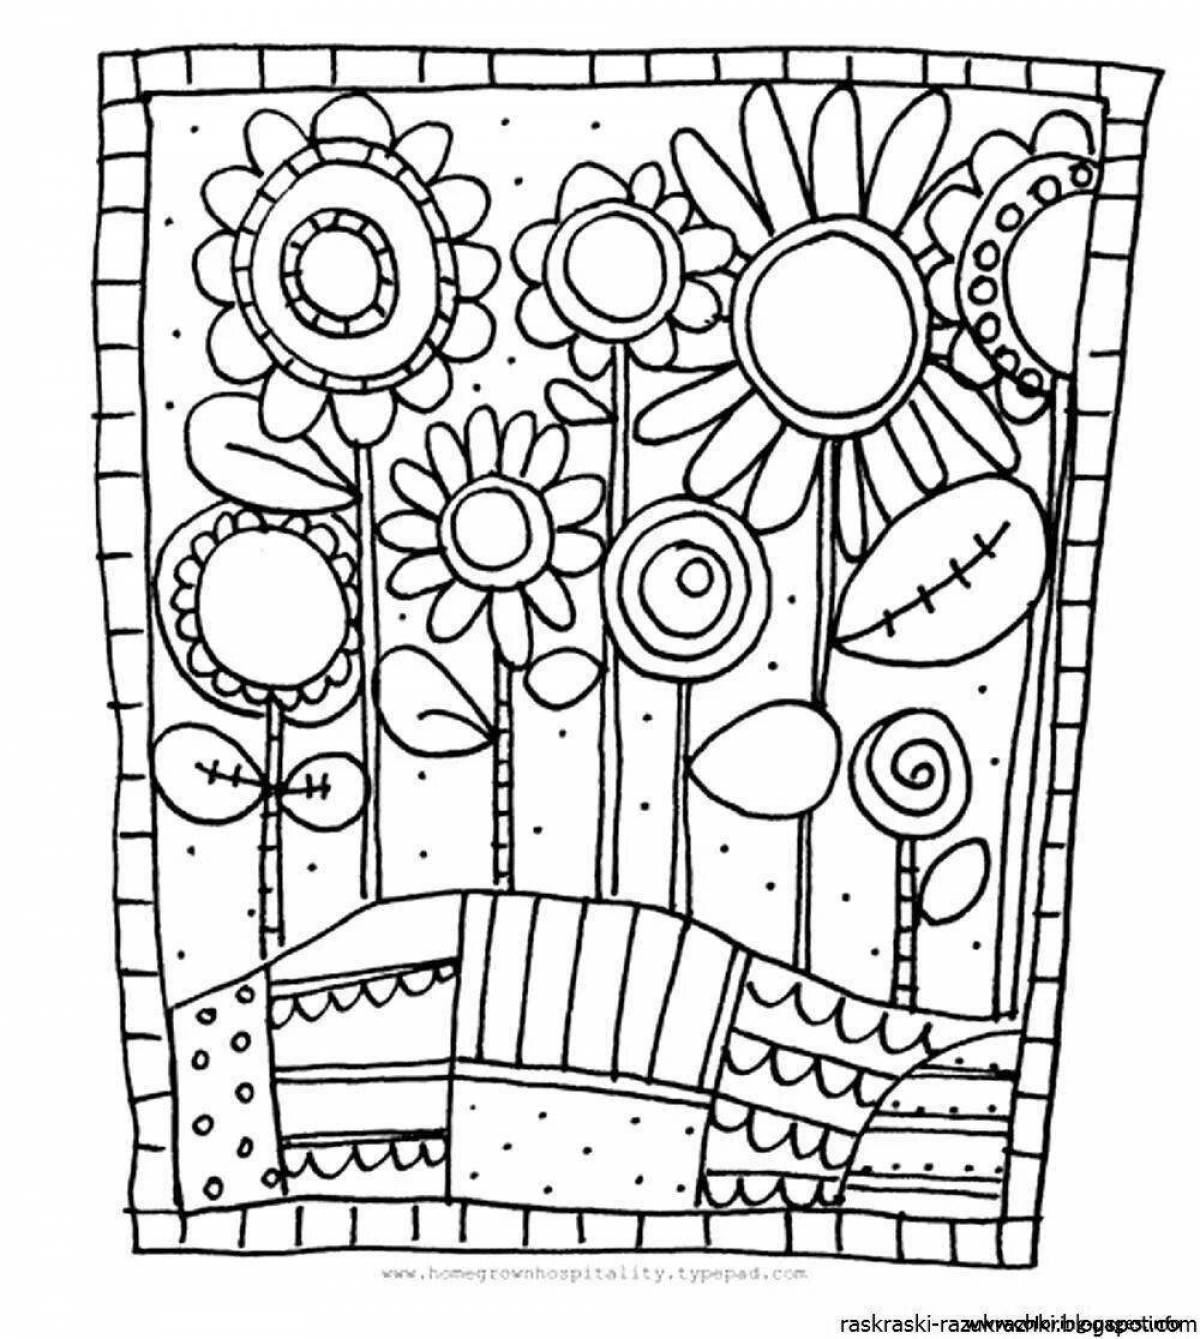 Magic coloring book small for kids